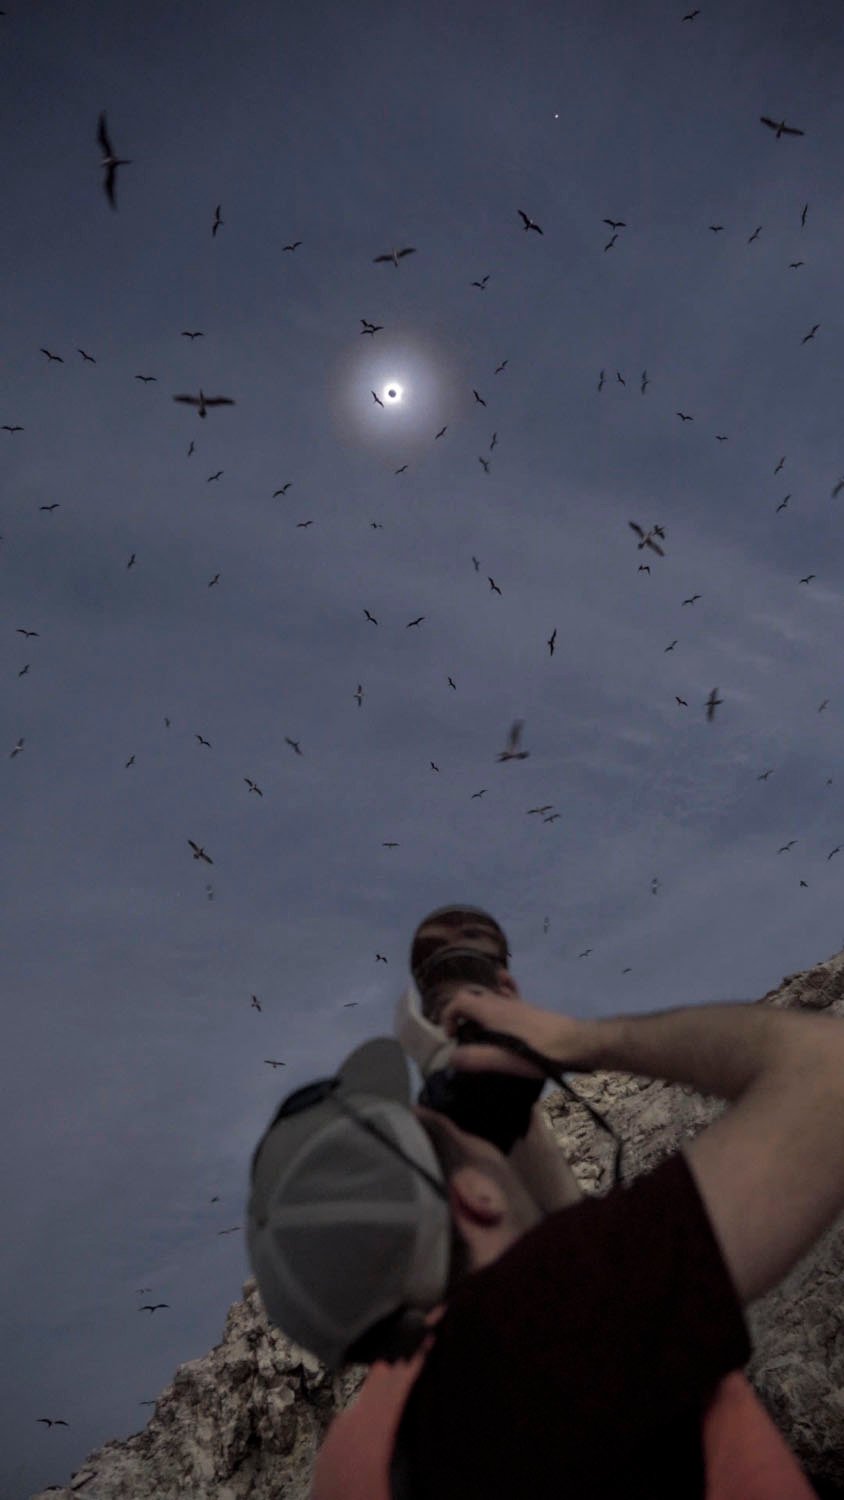 A person using a camera to photograph a lunar eclipse, surrounded by numerous flying birds under a dusky sky.